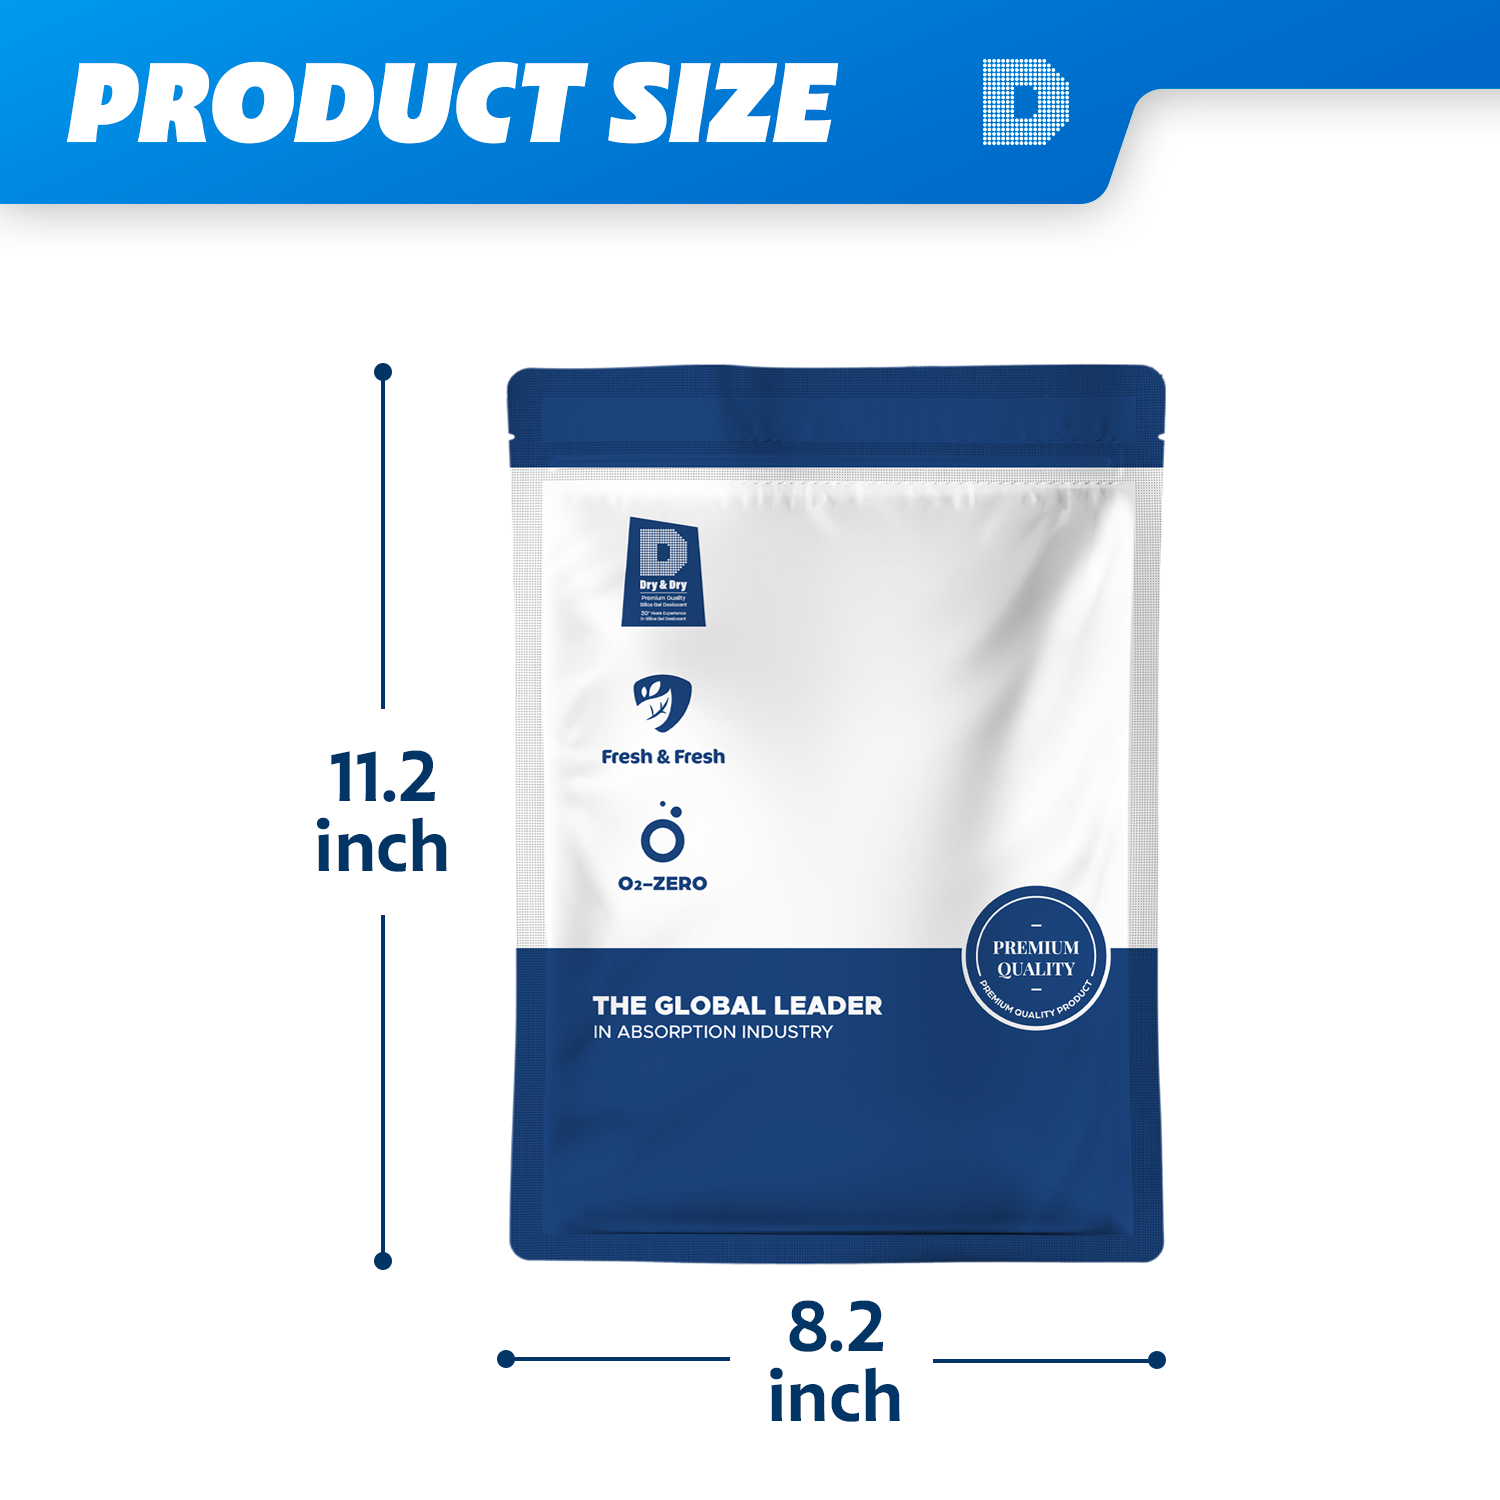 5 LBS "Dry&Dry" Premium Pure White Silica Gel Desiccant Beads